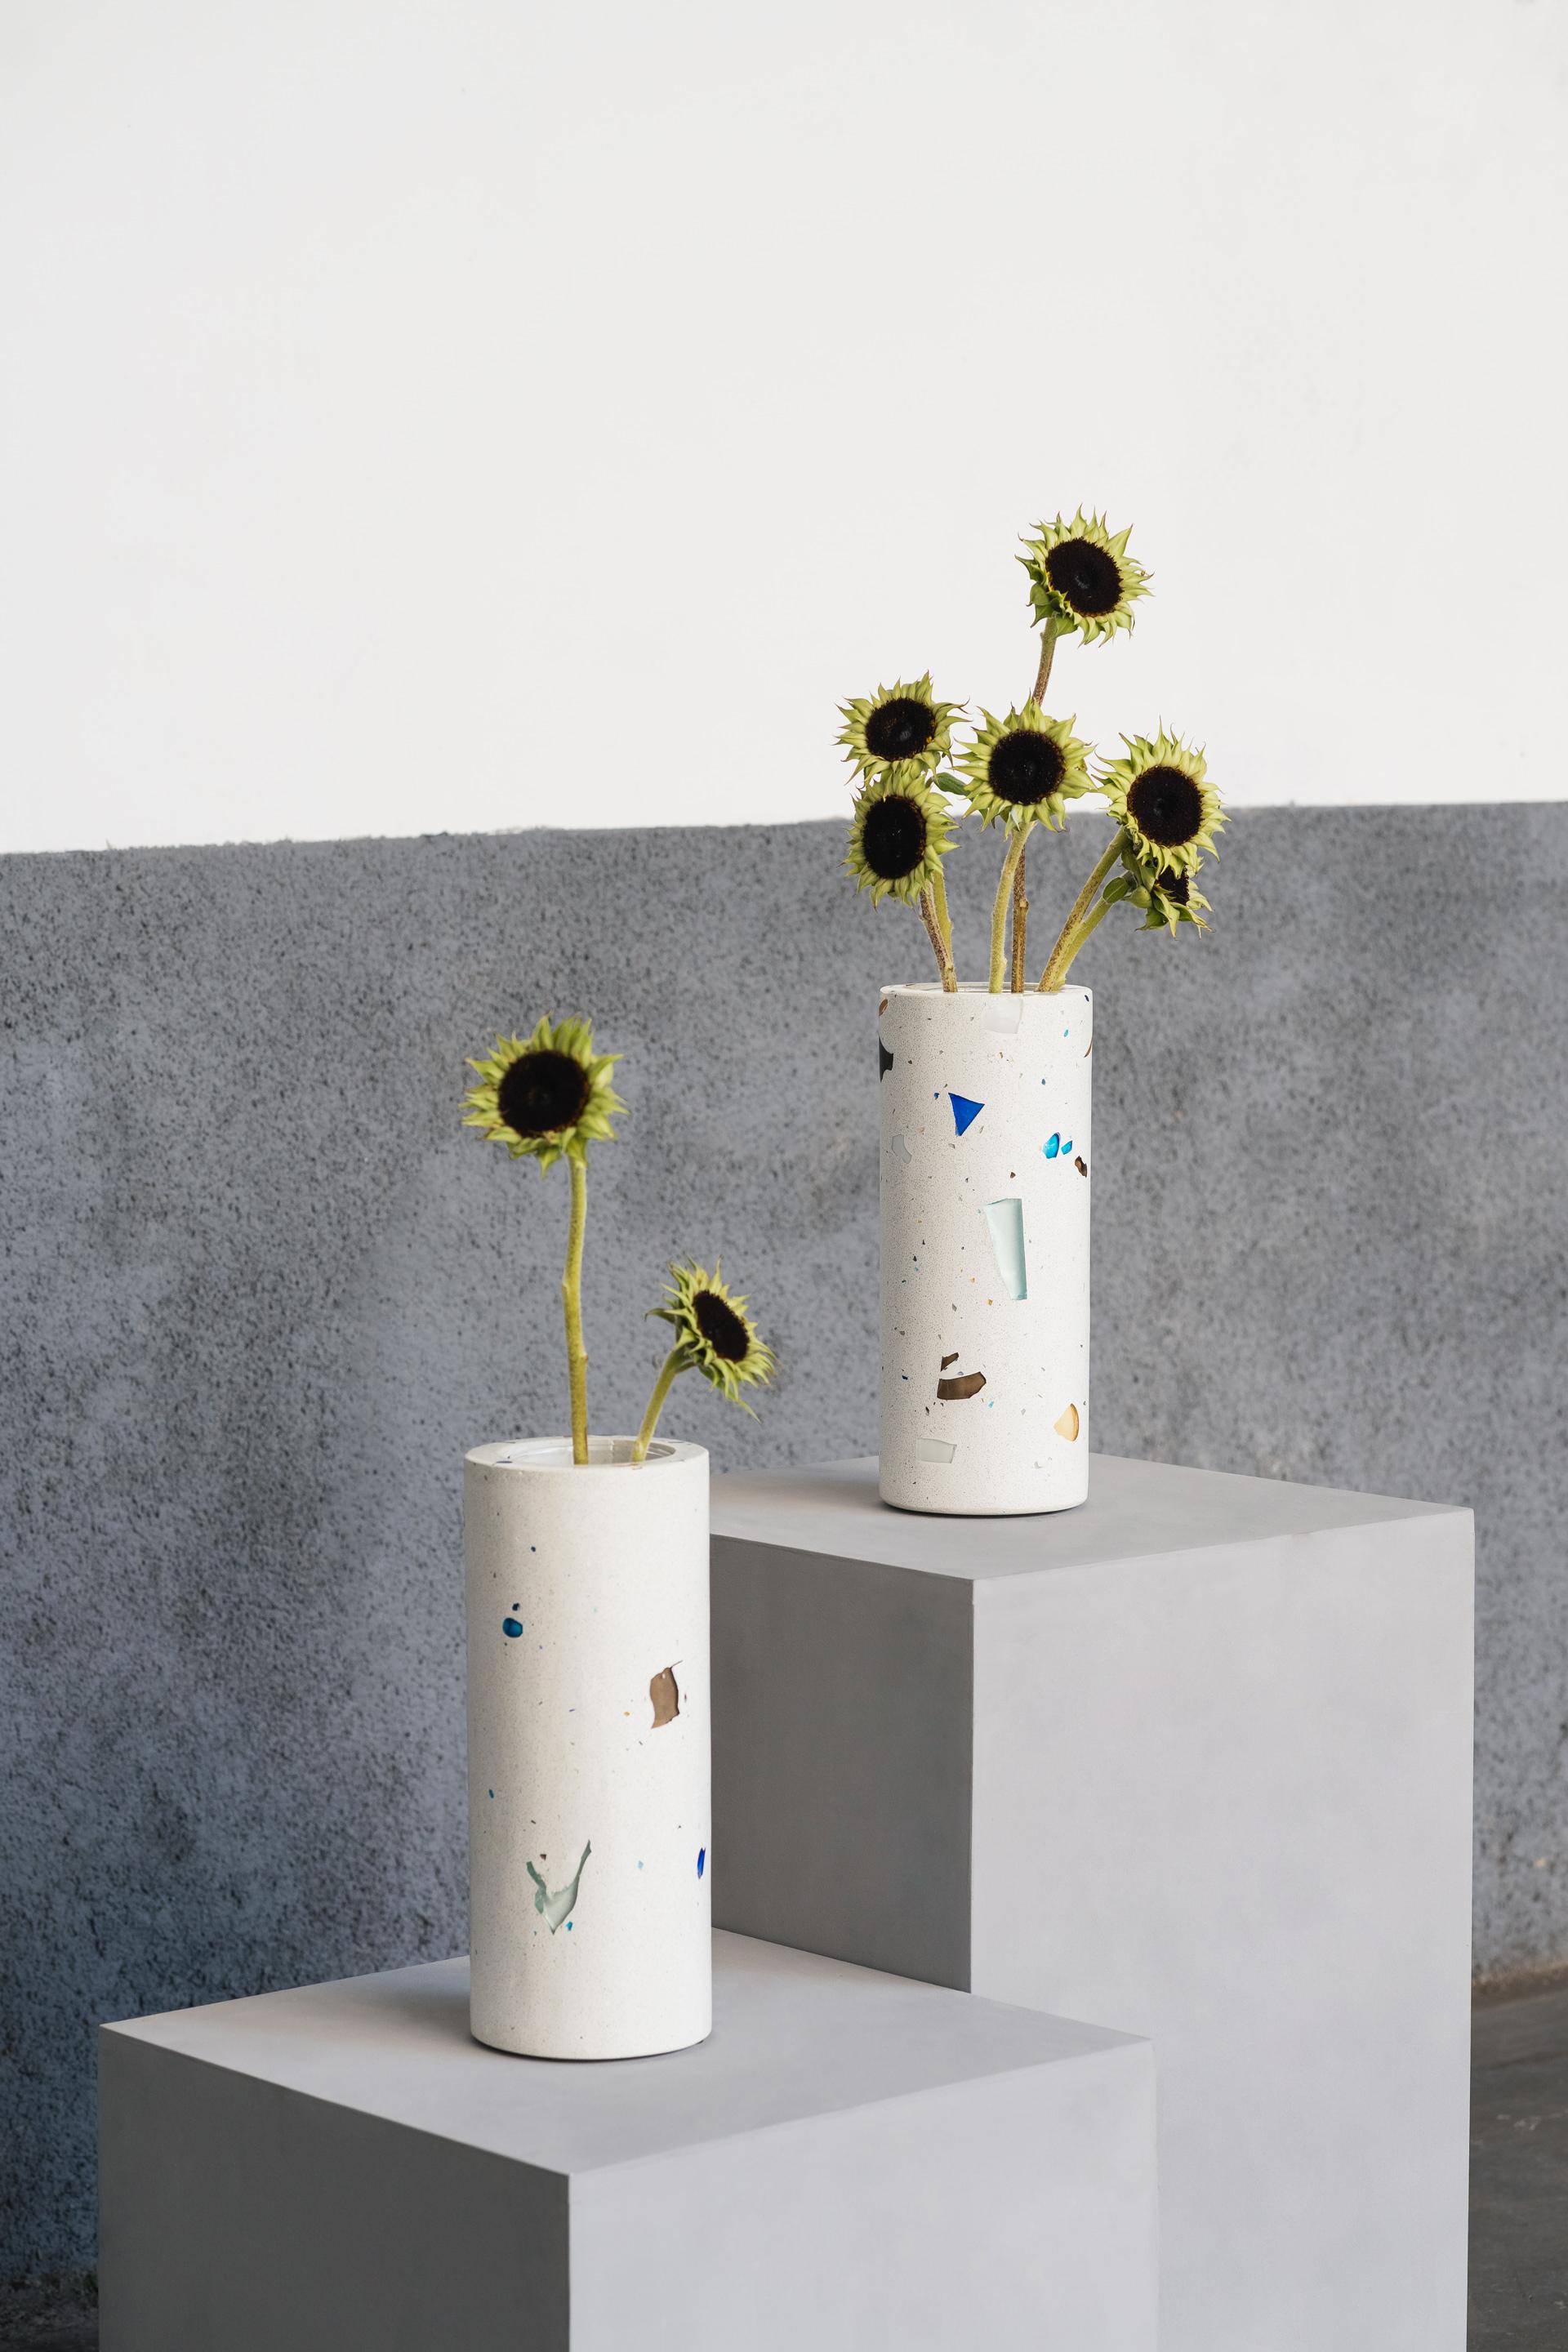 The Mono Vase takes part of the MONOMORFO collection. Its terrazzo composition is made of leftover glass crystals from a glass crystal factory in Minas Gerais, Brazil. This leftover material contributes to the creation of unique and colorful